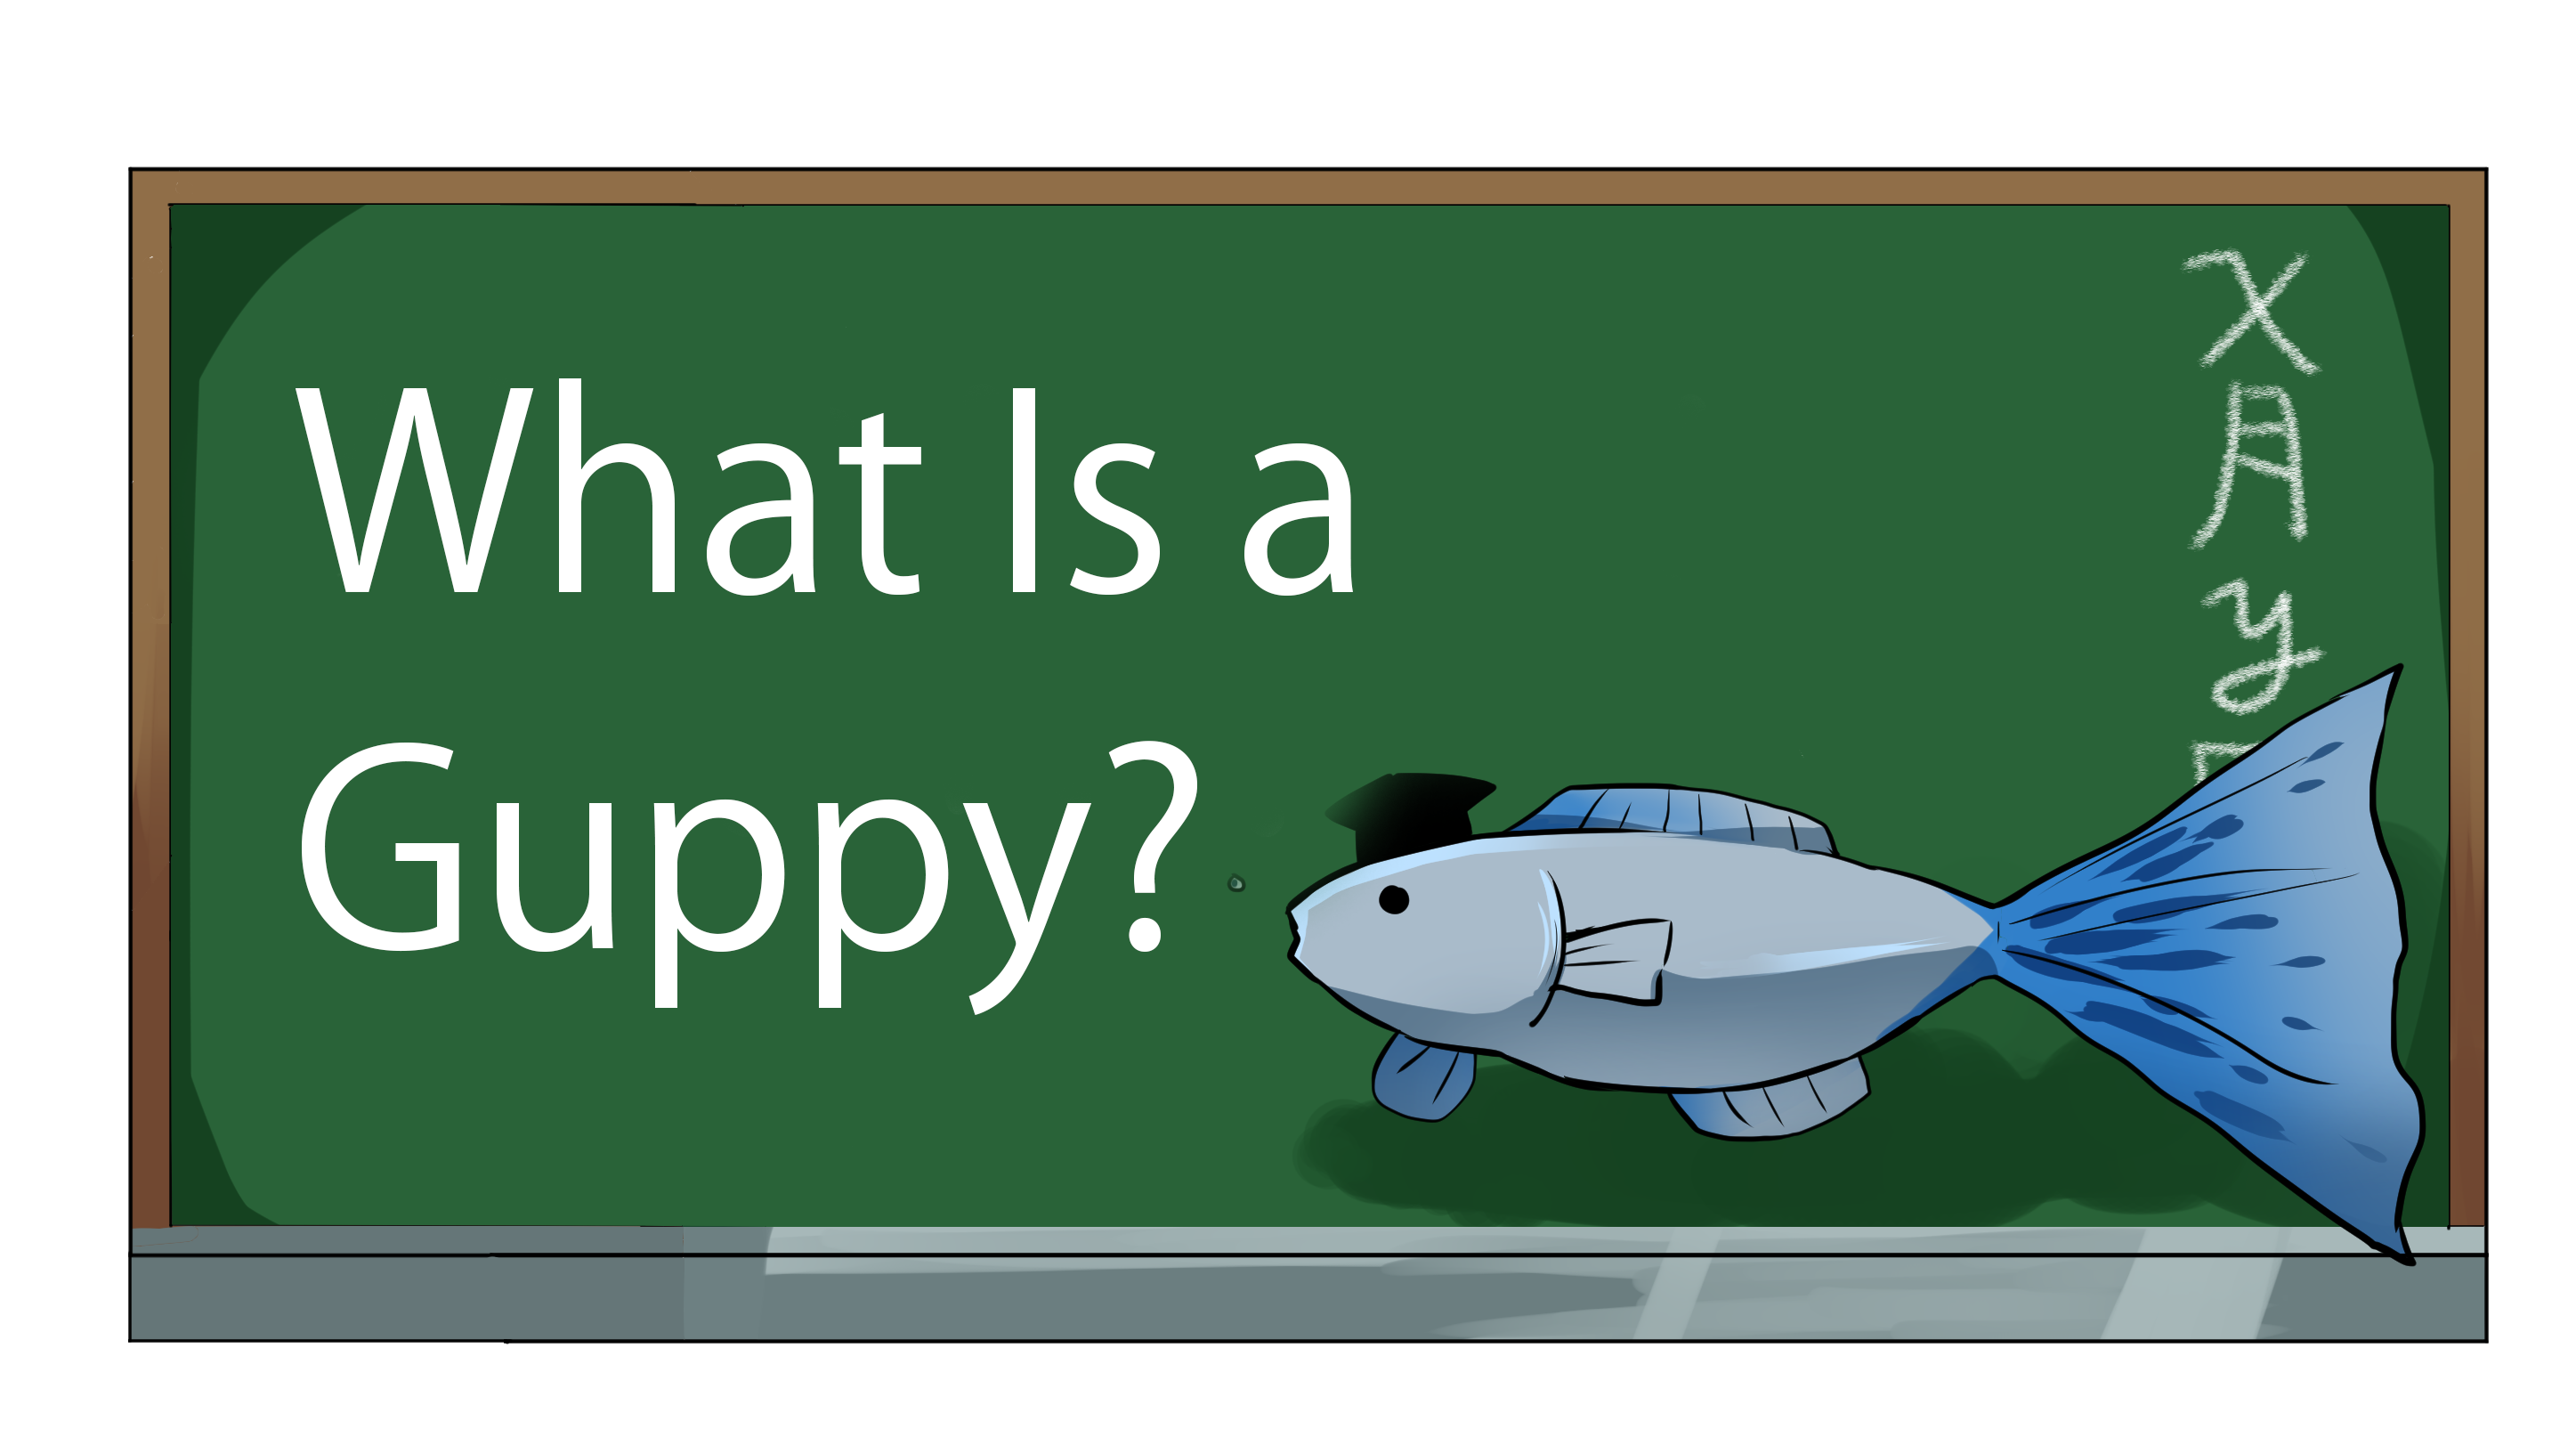 What Is a Guppy?